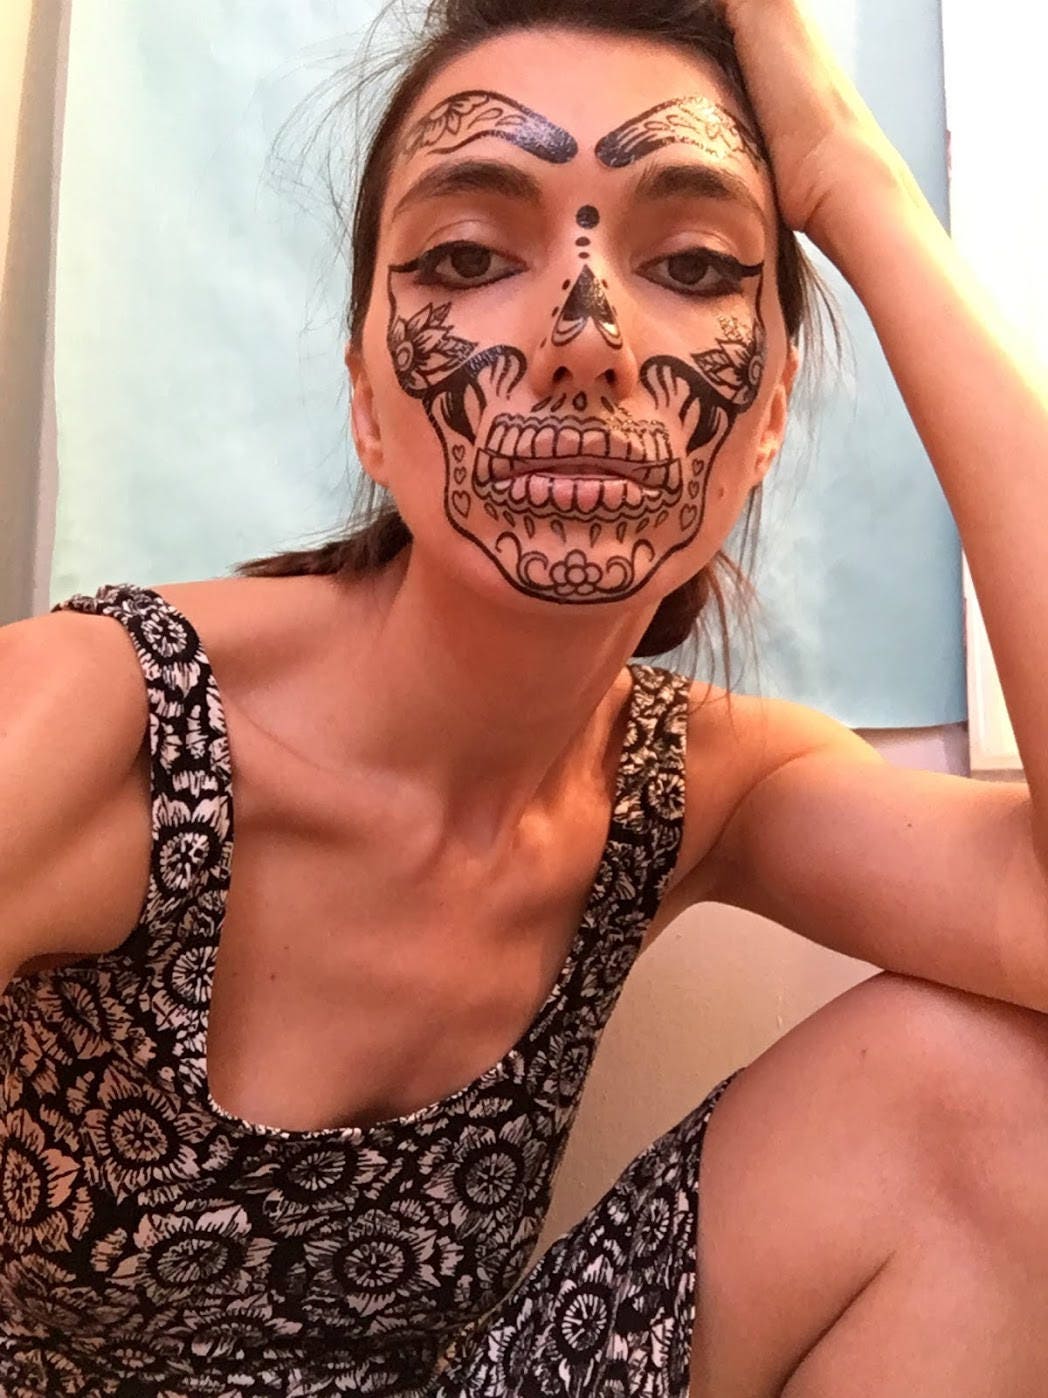  Halloween Rhinestone Suger Skull Face Tattoo Stickers Face  Jewels Gems Day Of The Dead Skull Face Decals Temporary Tattoo Kit Face  Rhinestones For Makeup Women Kids Festival Party Cosplay (Purple) 